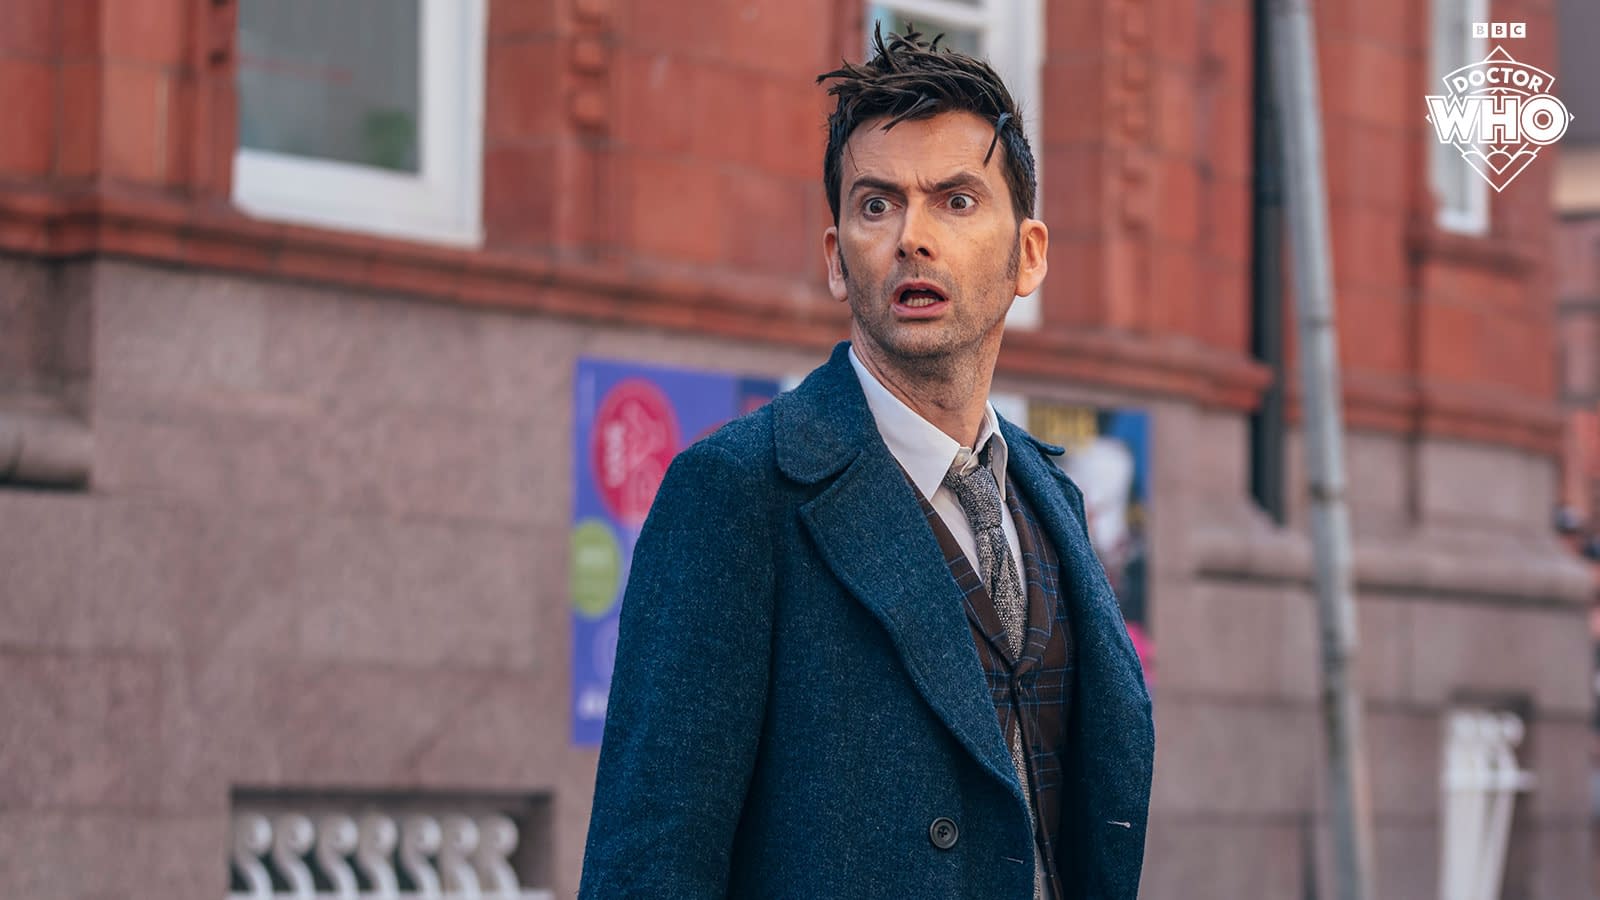 Doctor Who 60th Anniversary: 4 Quick Questions About That Trailer